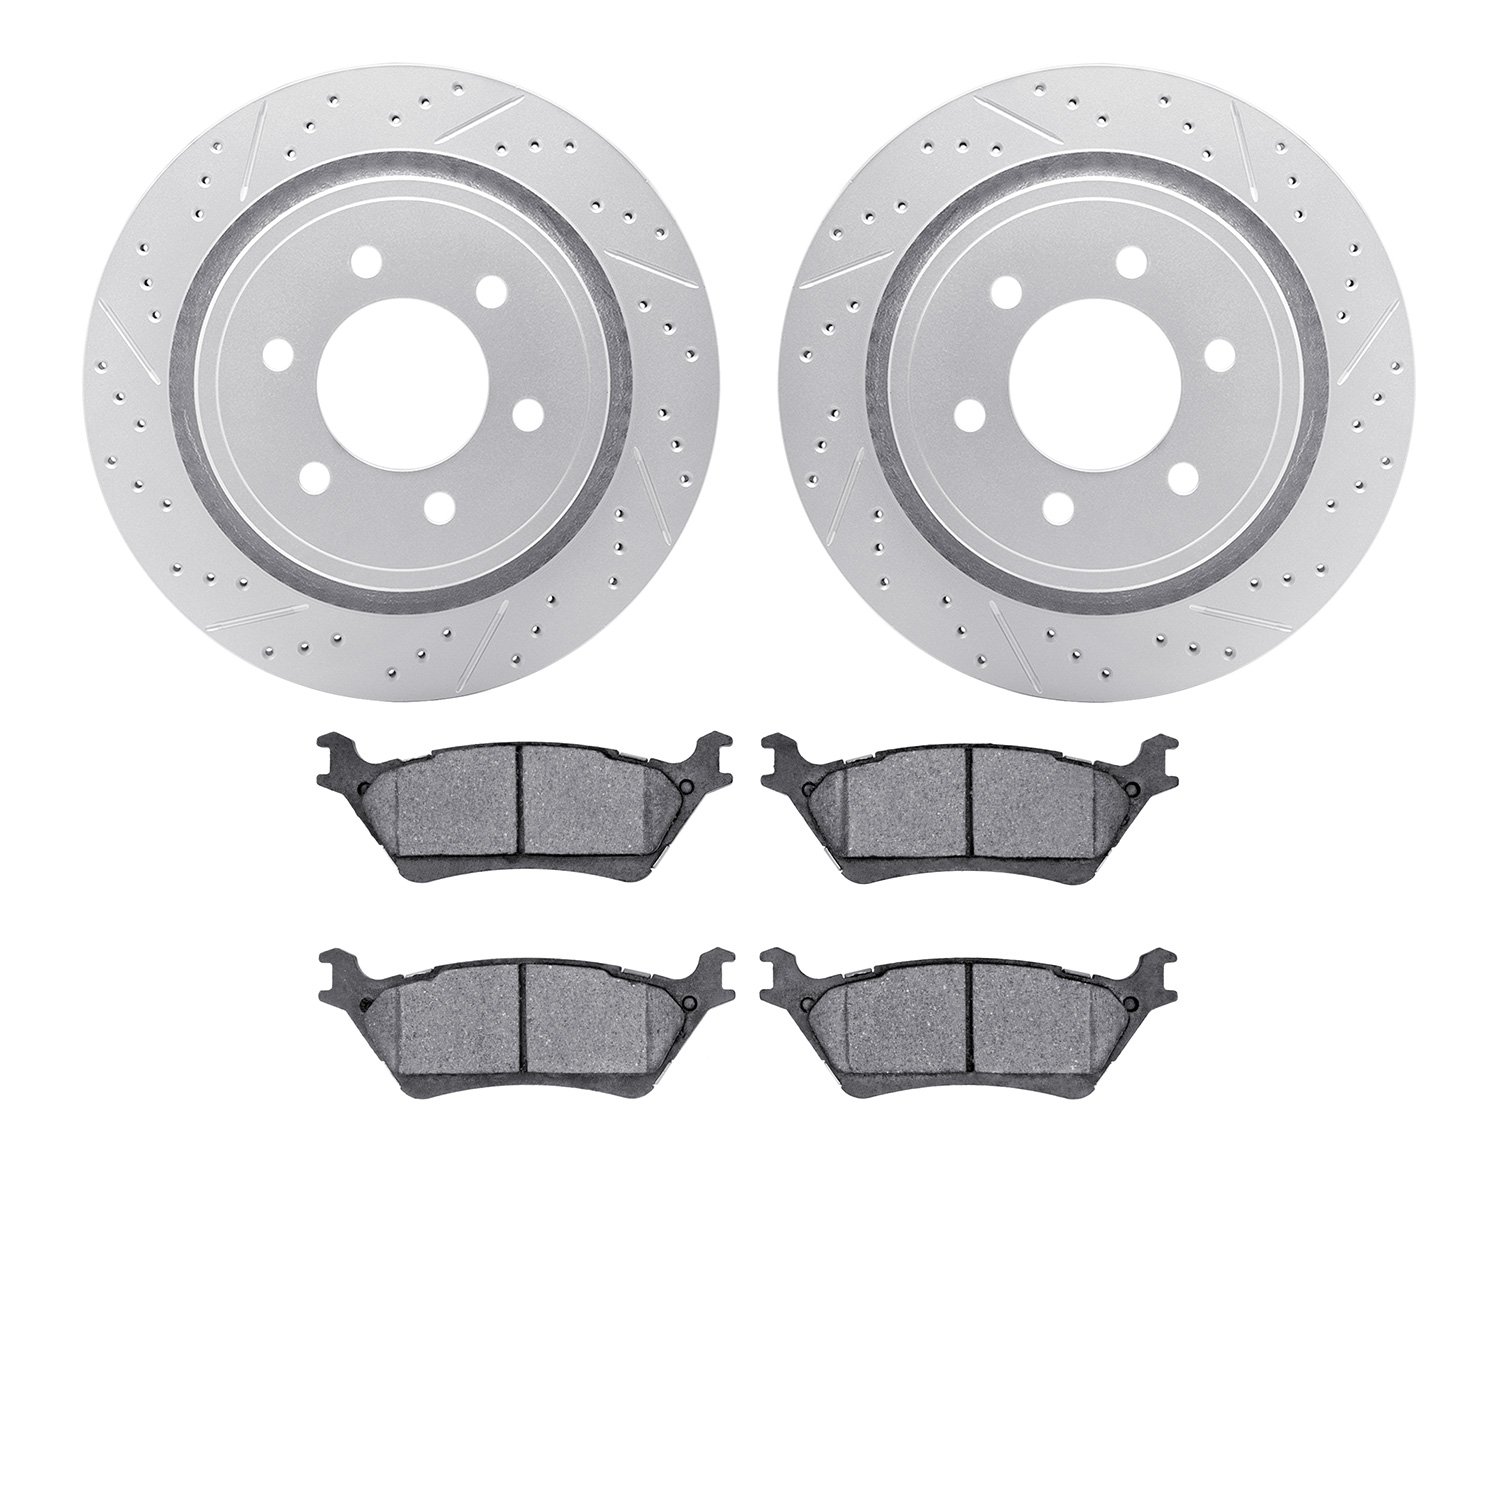 2402-54069 Geoperformance Drilled/Slotted Brake Rotors with Ultimate-Duty Brake Pads Kit, 2012-2020 Ford/Lincoln/Mercury/Mazda,